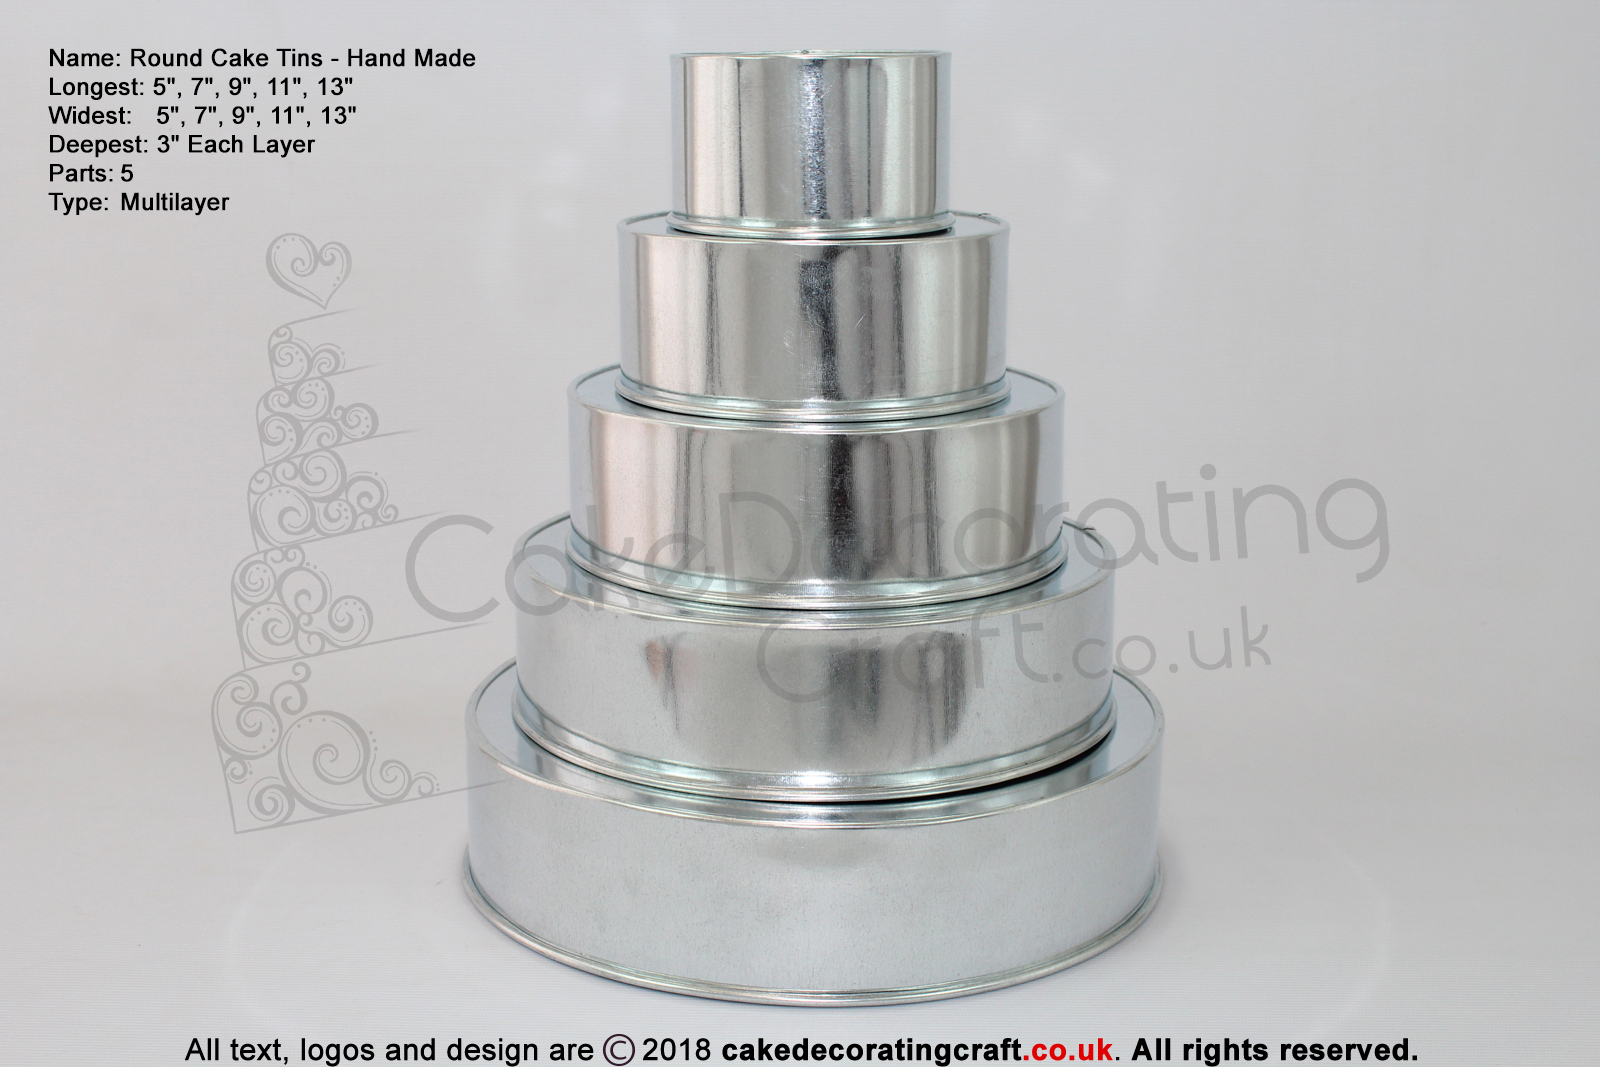 Round Cake Baking Tin | 3" Deep | Size 5 7 9 11 13 " | 5 Tiers | Hand Made